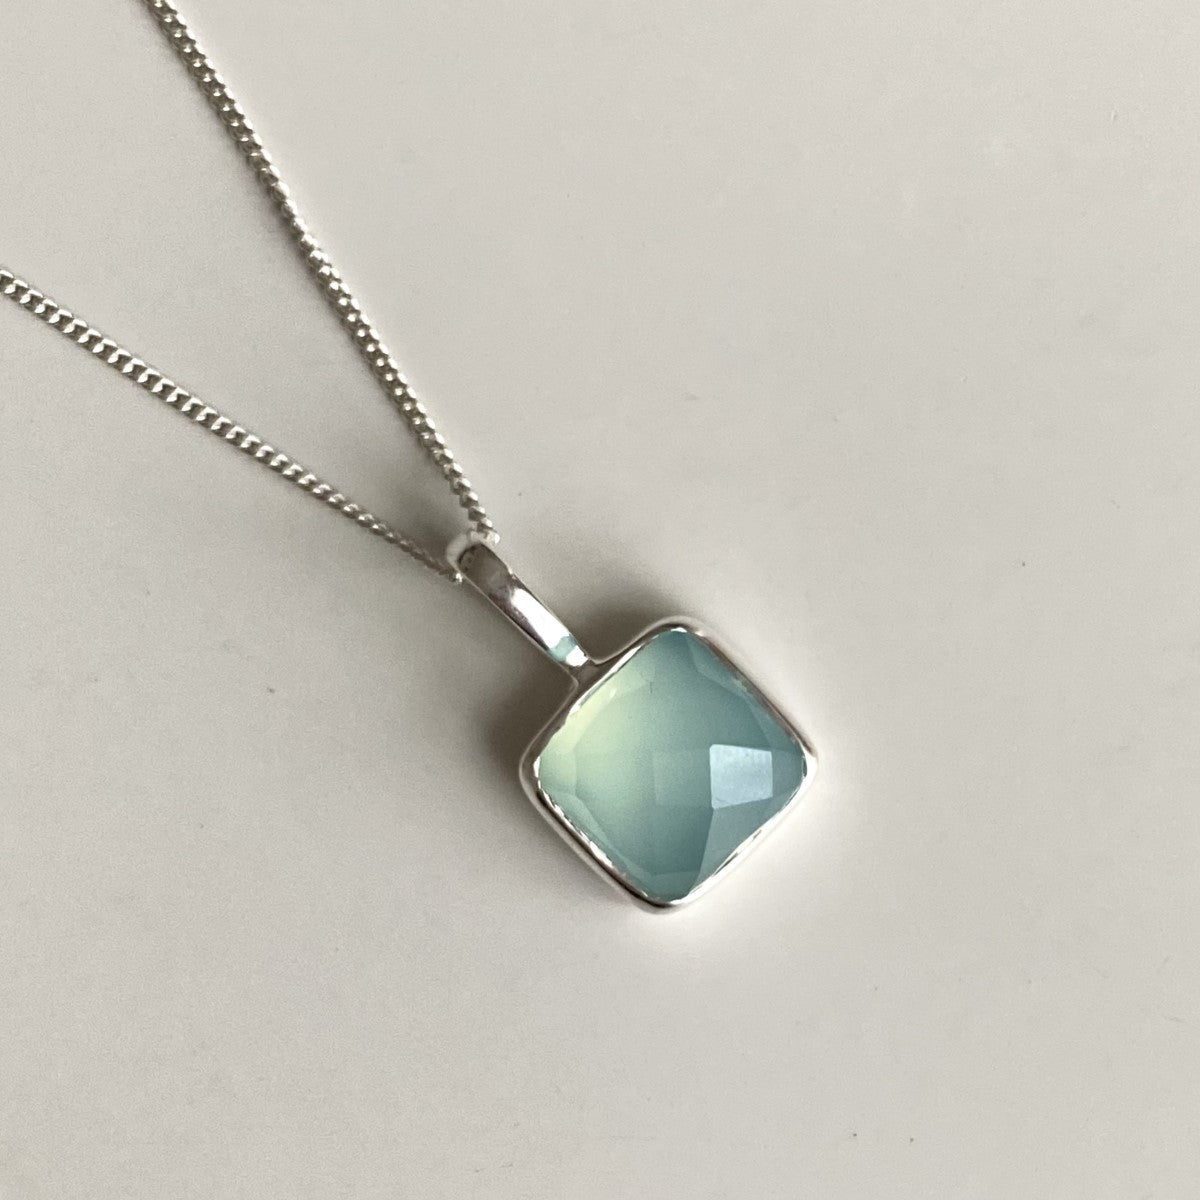 Sterling Silver Pendant Necklace with a Faceted Square Gemstone - Aqua Chalcedony